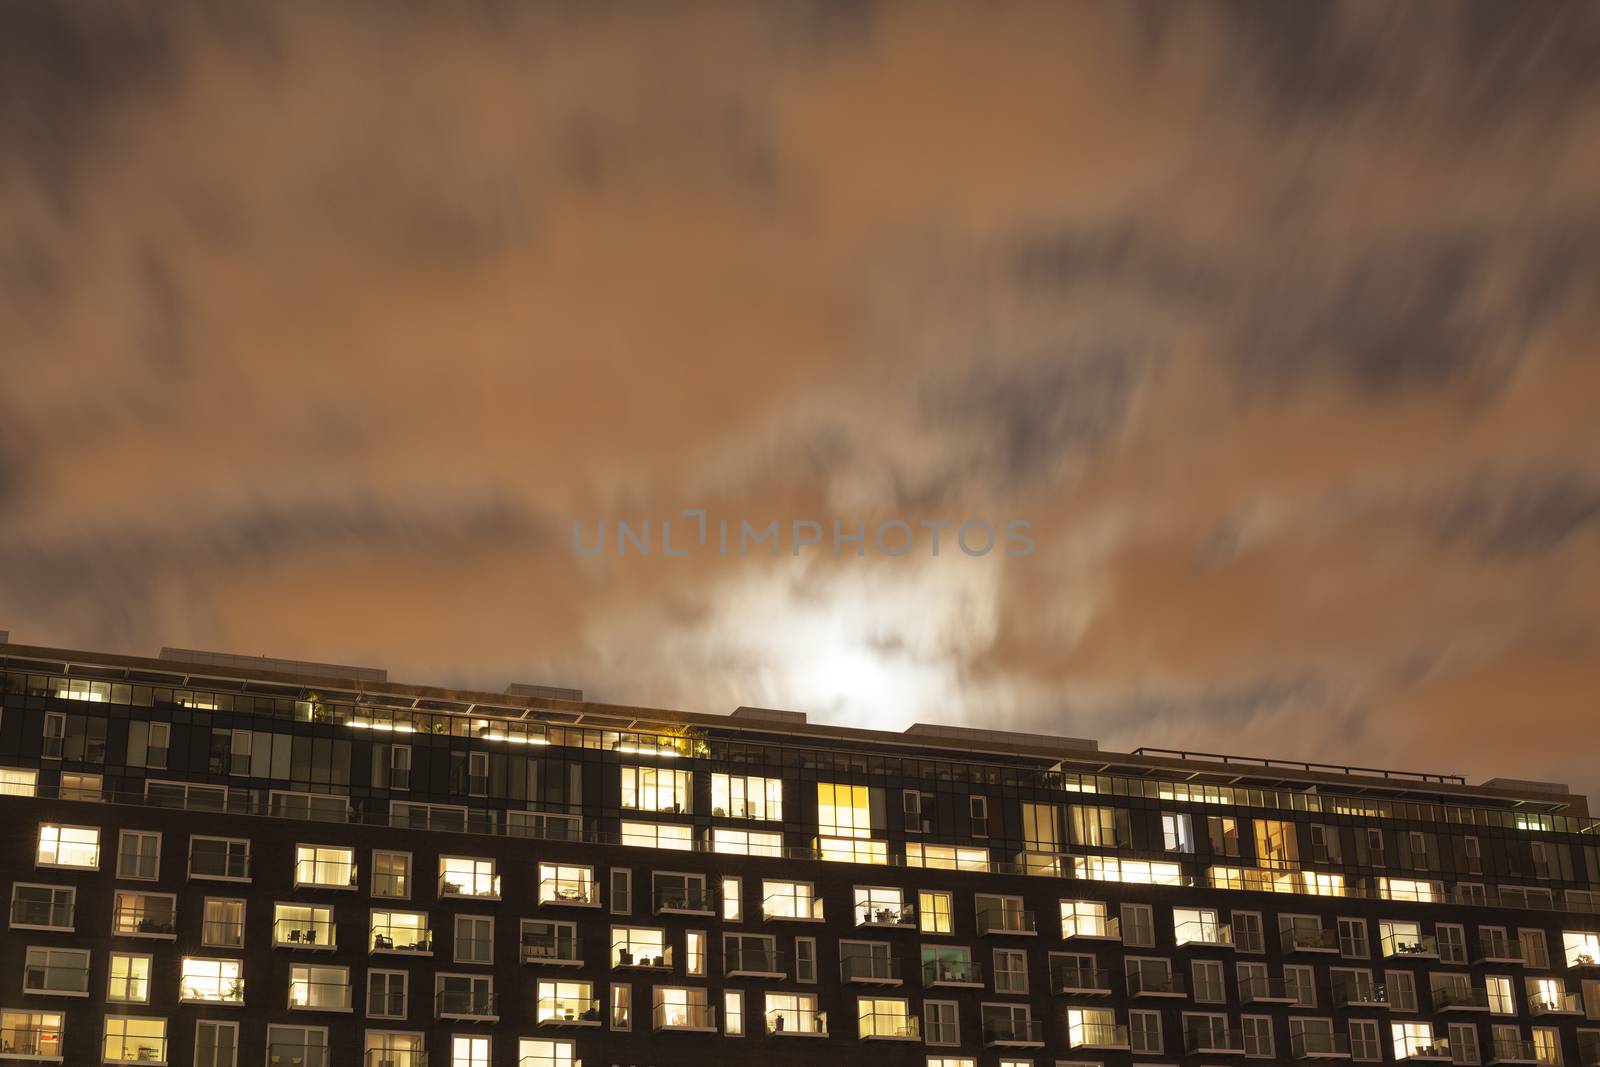 Moon rising over a modern apartment building at dusk